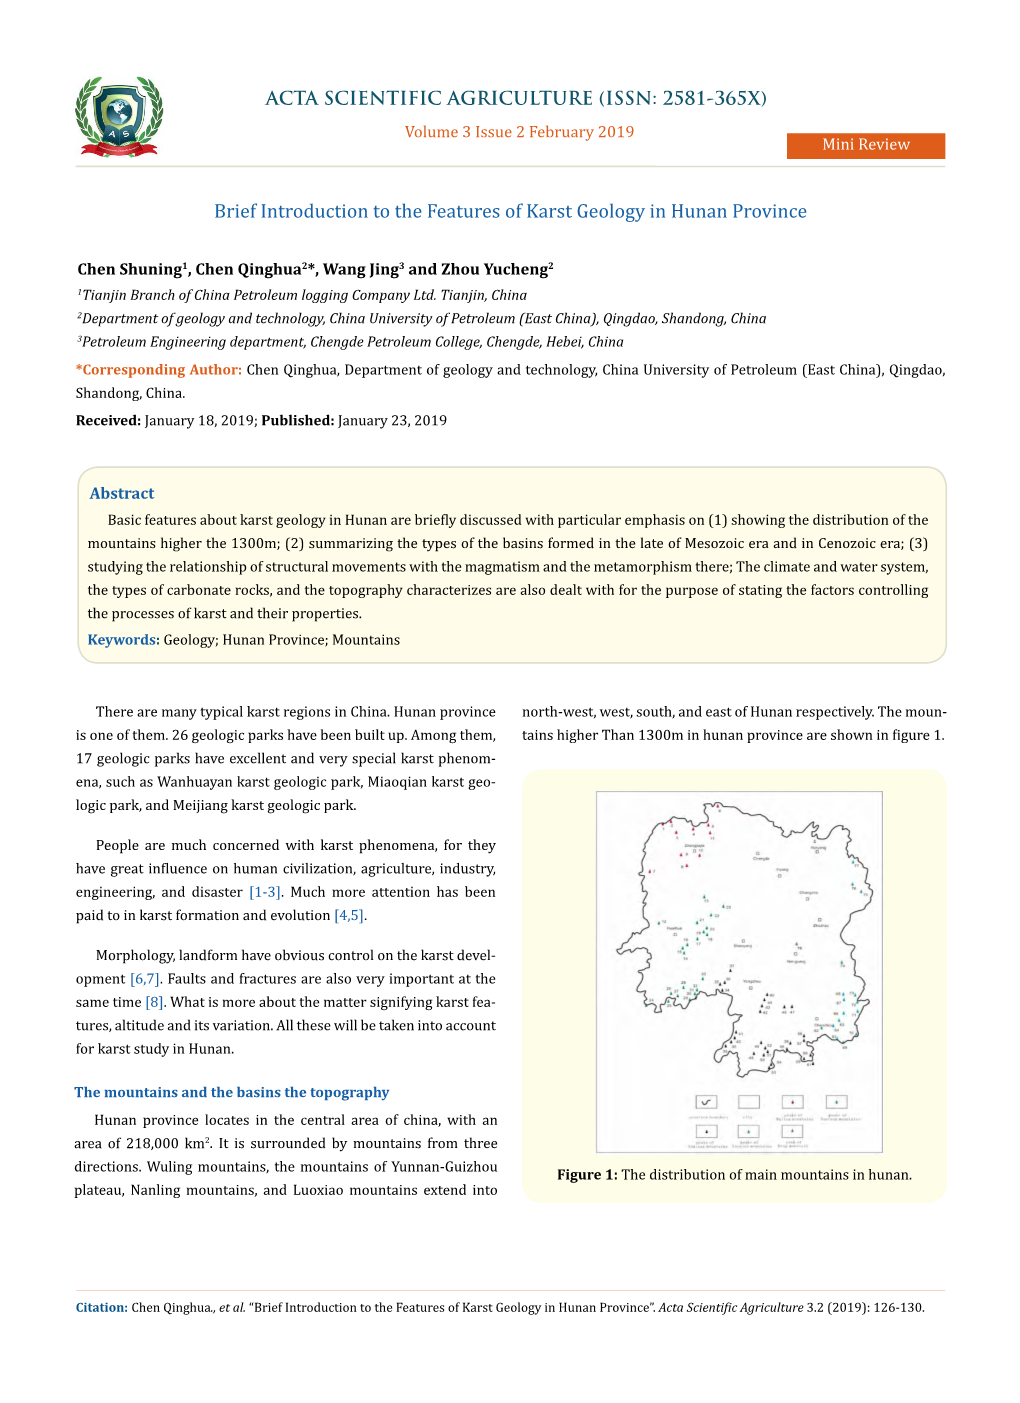 Brief Introduction to the Features of Karst Geology in Hunan Province